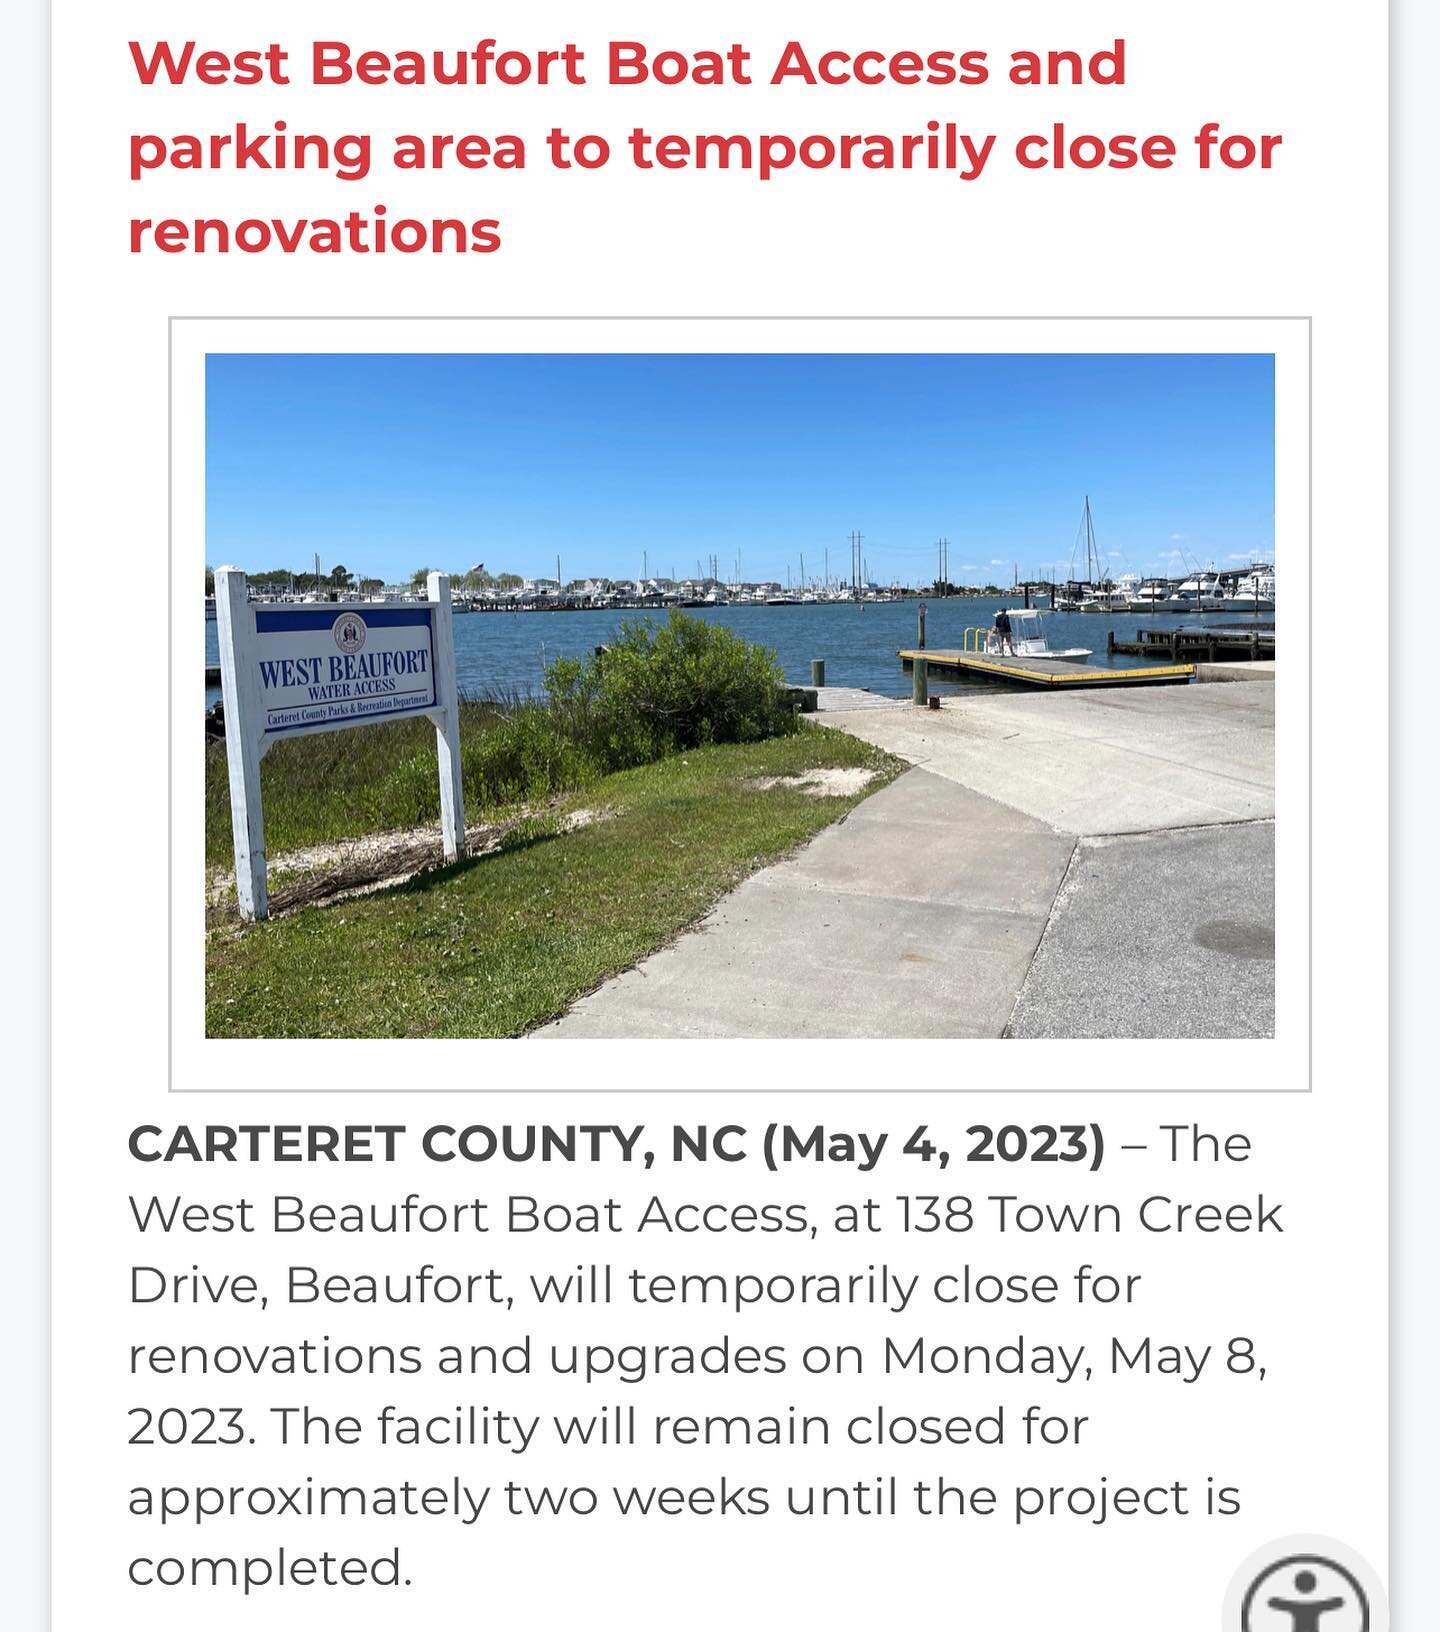 🚨🚨🚨Notice🚨🚨🚨
We are renovating our local public boat ramp!  Starting next Monday the West Beaufort Boat Ramp will be Closed for 2-weeks. We are excited to begin this project and FINALLY upgrade this very popular public access.